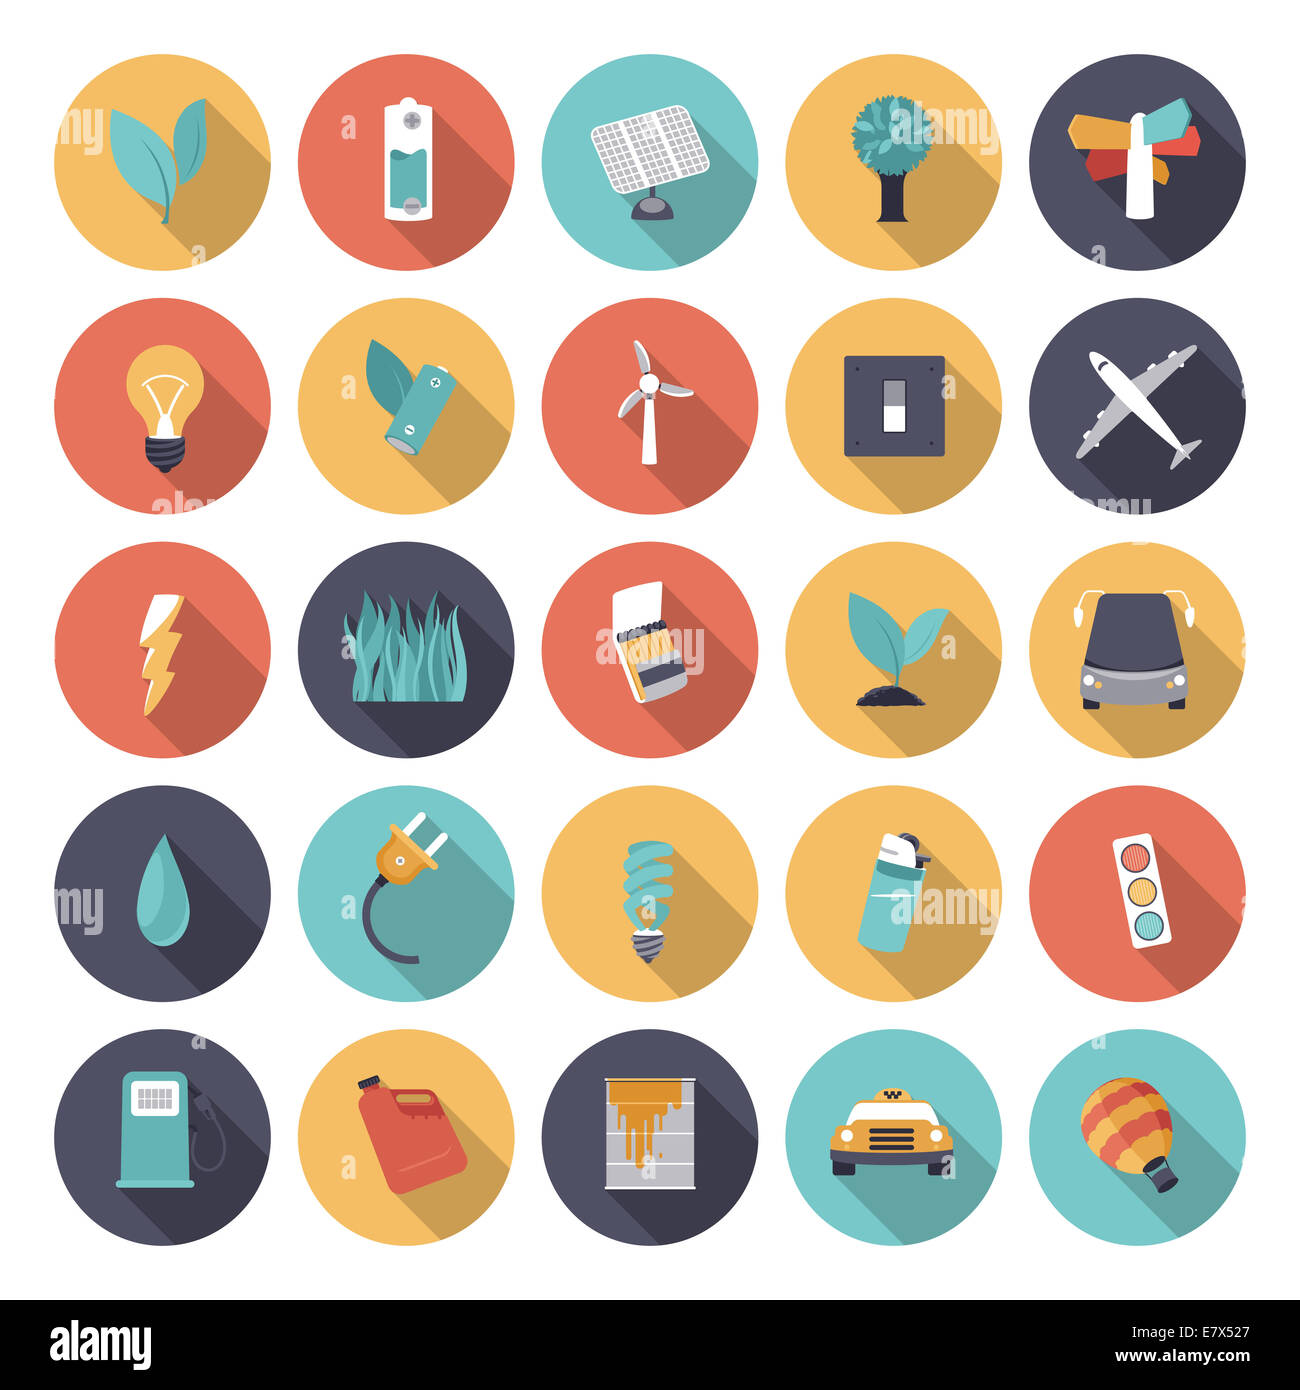 Flat design icons for energy. Stock Photo